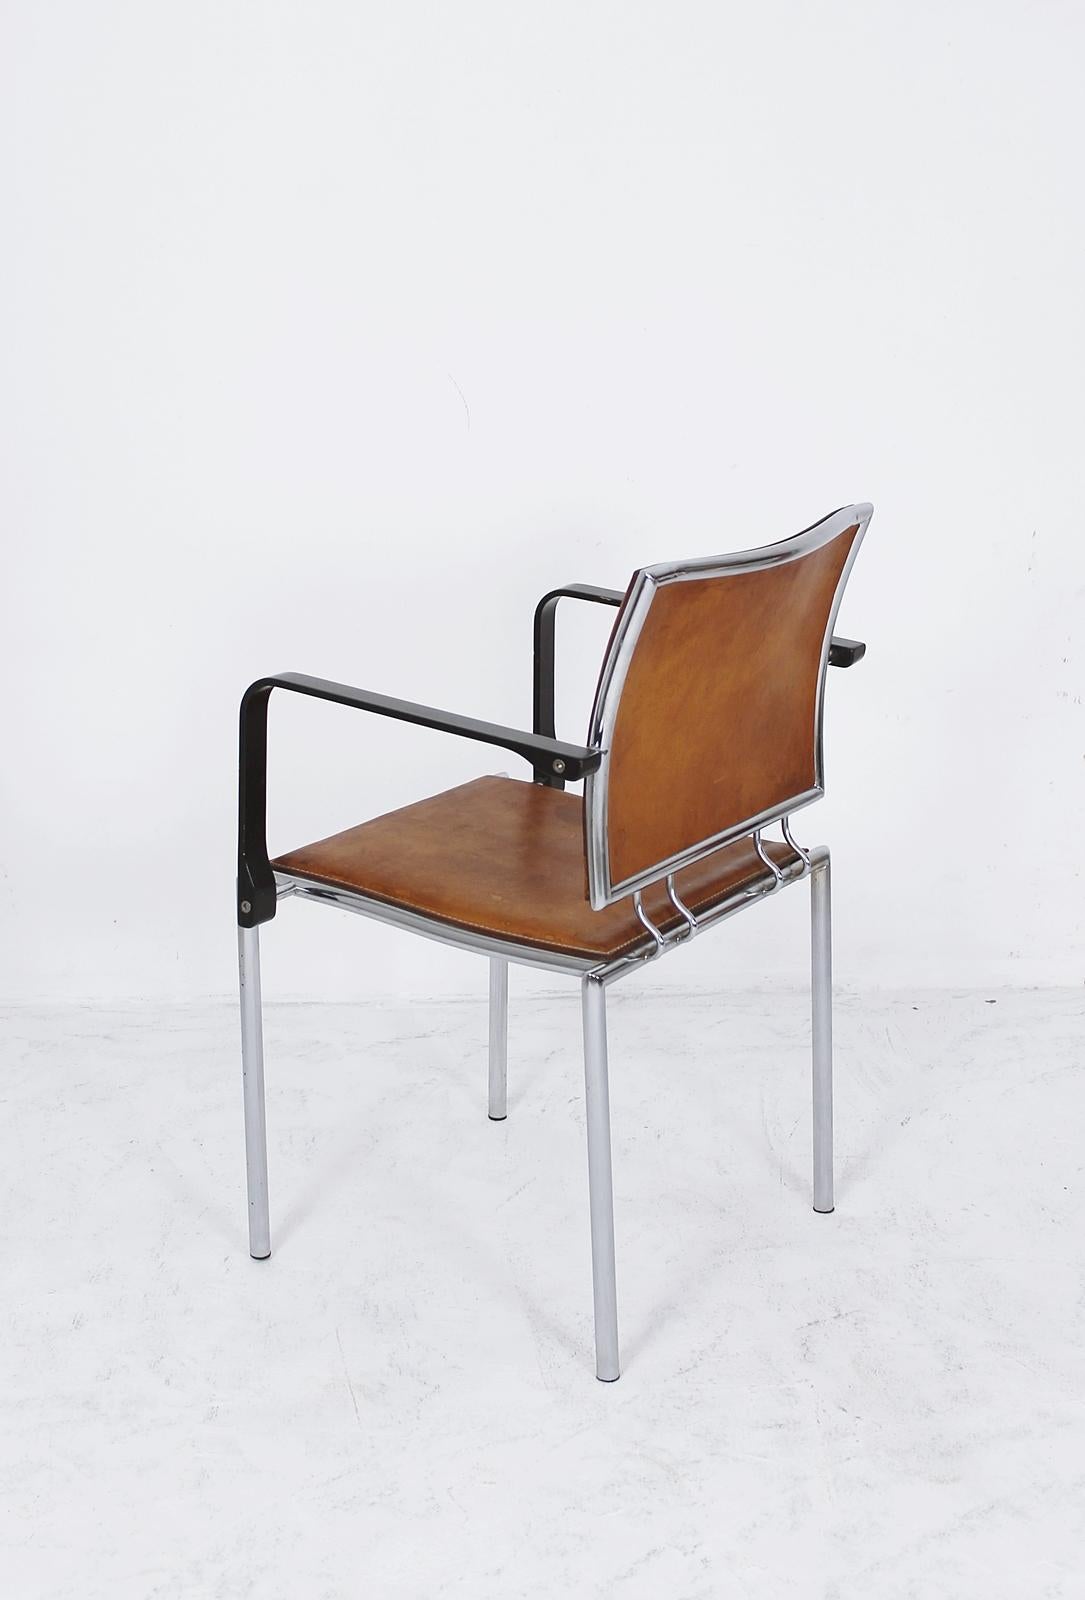 Swiss Armchair Quadro Steel by Bruno Rey & Charles Polin for Dietiker, 1990s For Sale 3